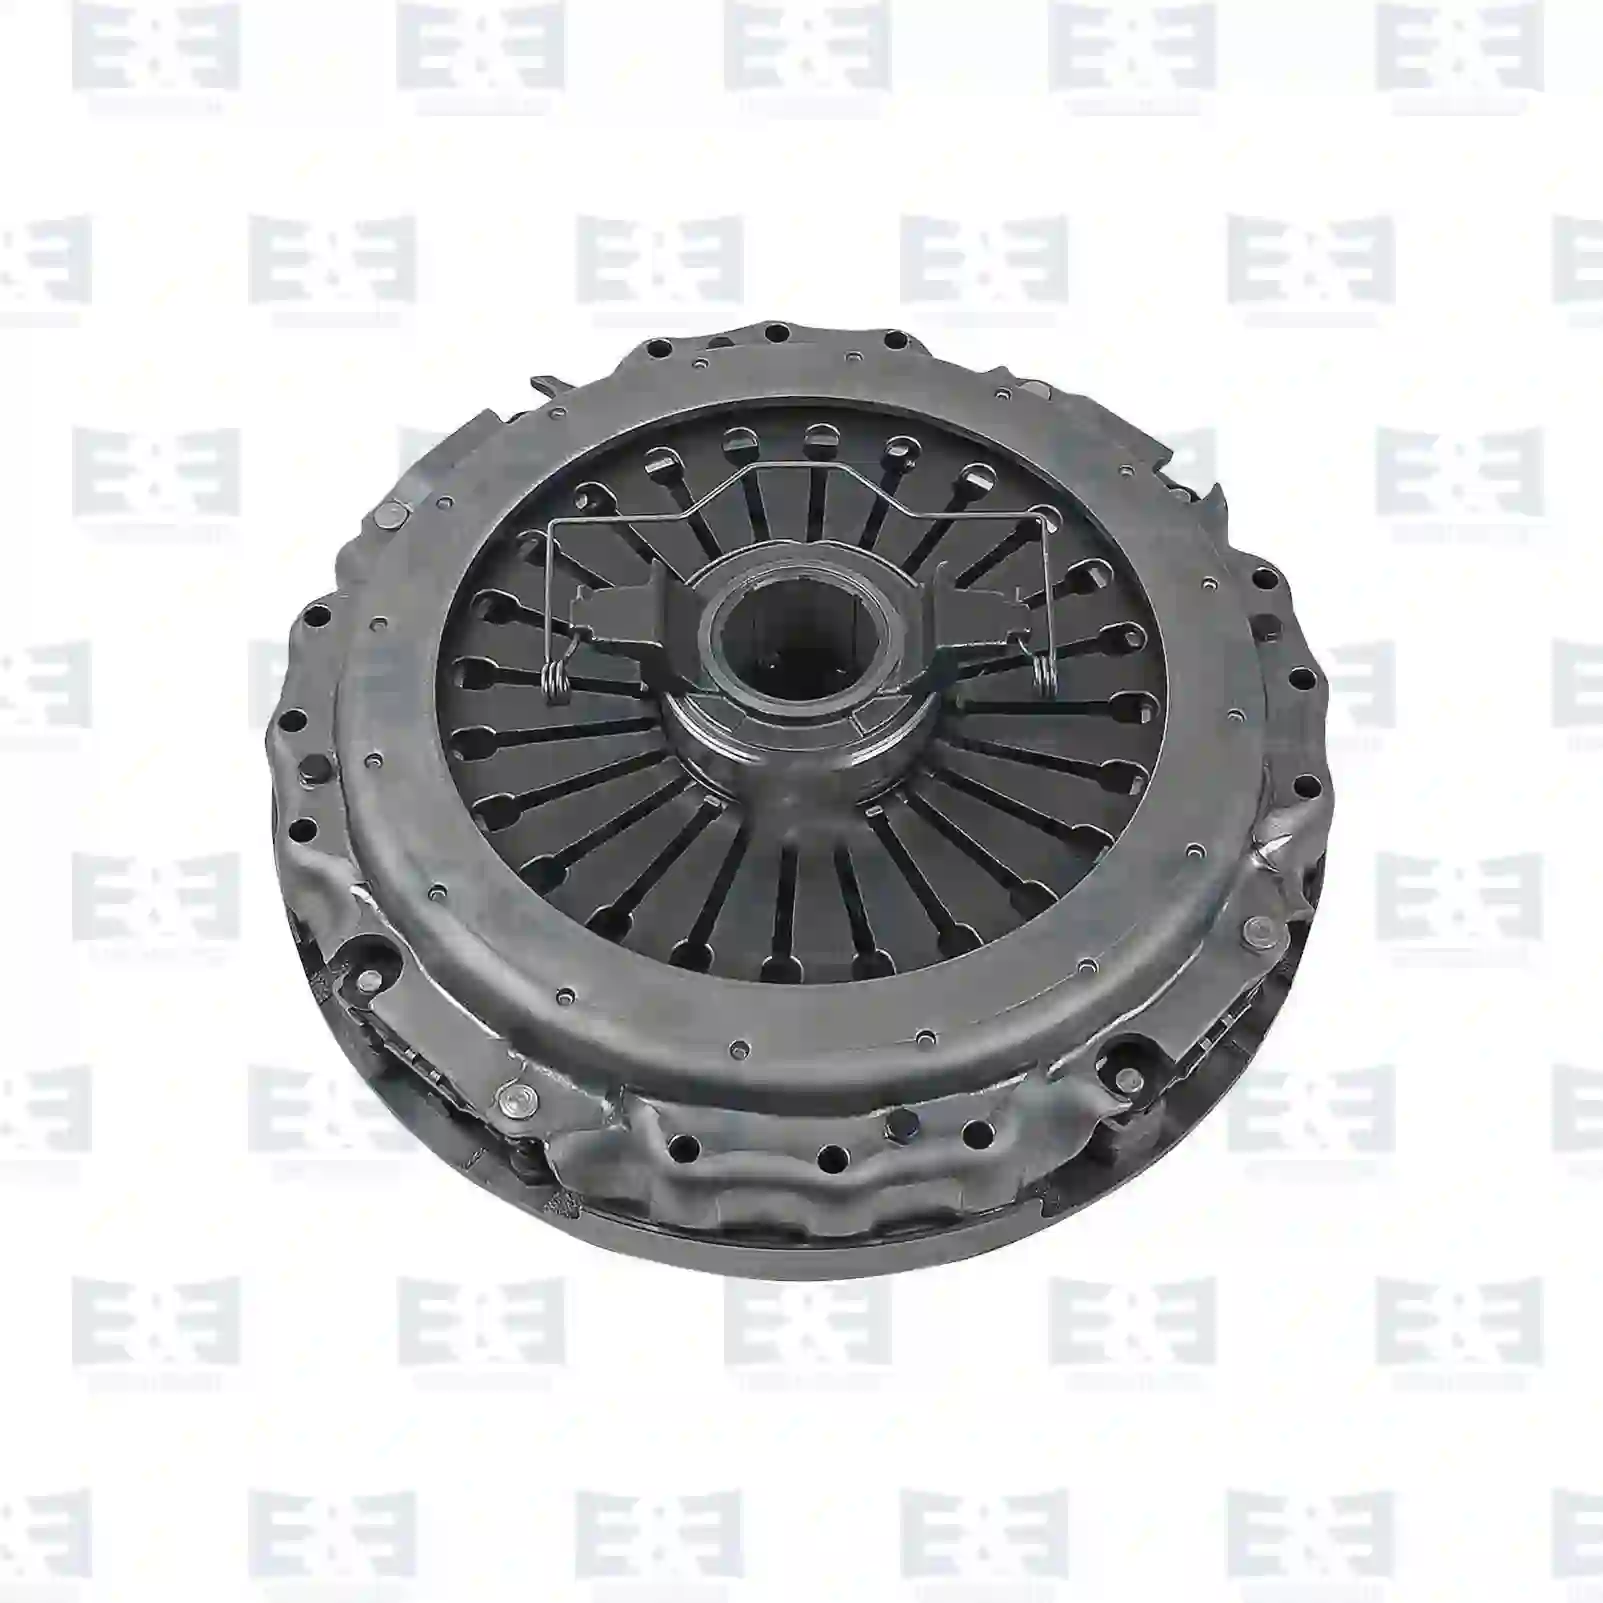 Clutch cover, with release bearing, 2E2288855, 20366876, 20569145, 20571156, 8172350, 85000252, 85003120 ||  2E2288855 E&E Truck Spare Parts | Truck Spare Parts, Auotomotive Spare Parts Clutch cover, with release bearing, 2E2288855, 20366876, 20569145, 20571156, 8172350, 85000252, 85003120 ||  2E2288855 E&E Truck Spare Parts | Truck Spare Parts, Auotomotive Spare Parts